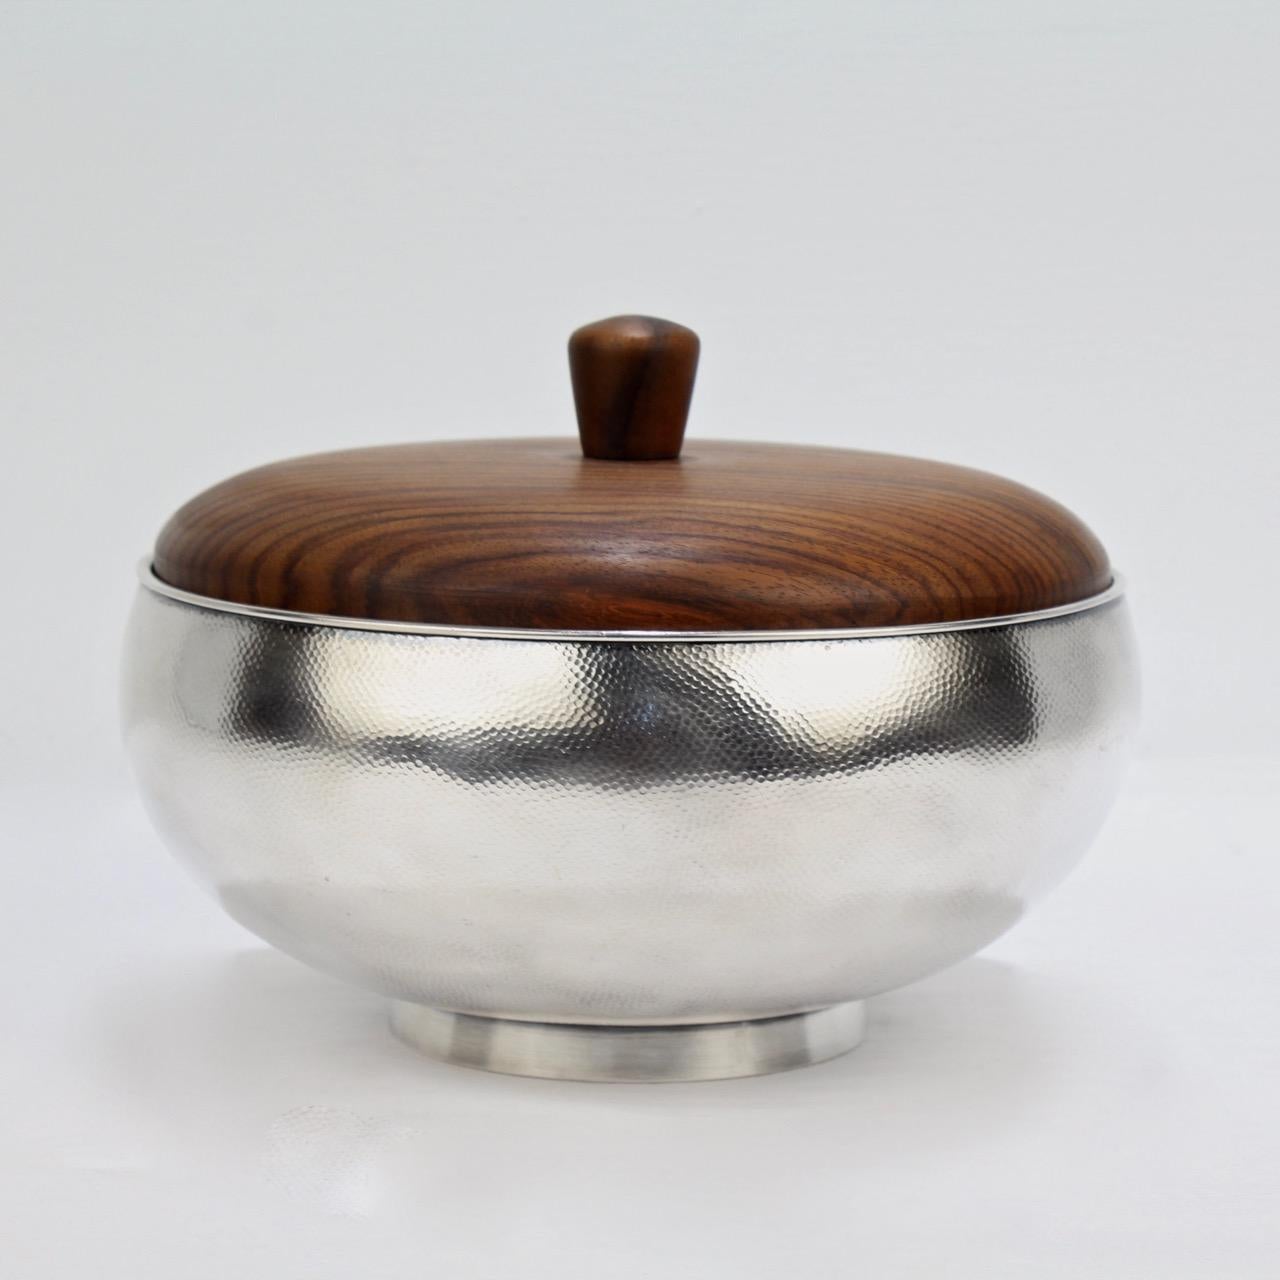 A very fine hand hammered sterling silver bowl with a wooden lid by Asahi Shoten.

The silver body with stippled hammer marks throughout and the interior with a liver sulfur finish. The wooden lid has knob form finial.

The base is marked for Asahi